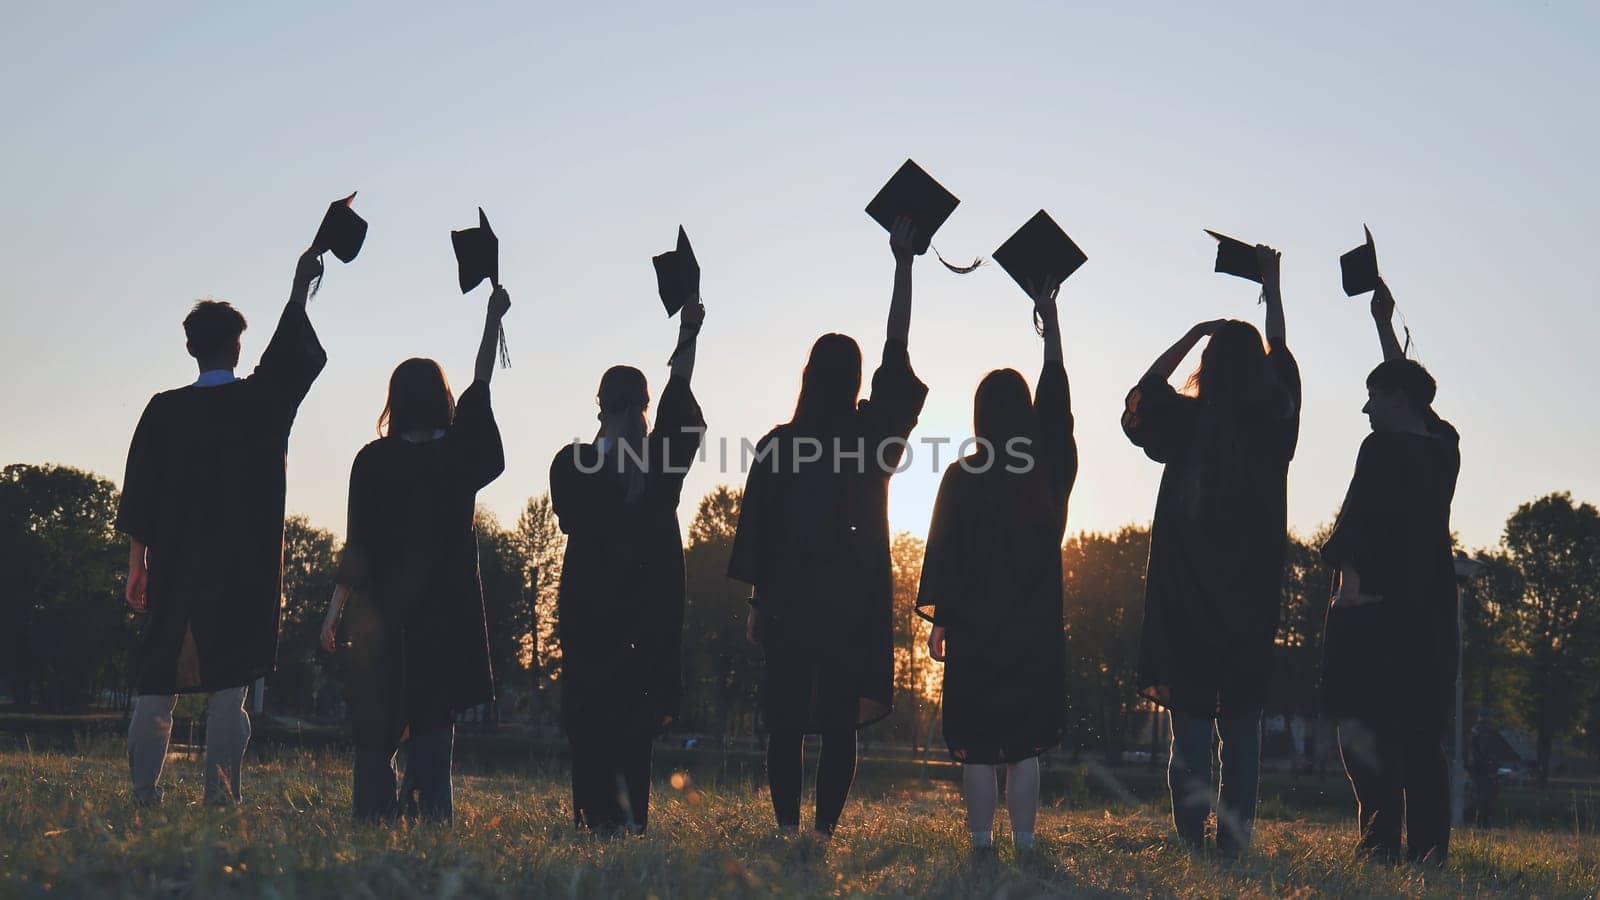 Silhouettes of college graduates waving their caps at sunset